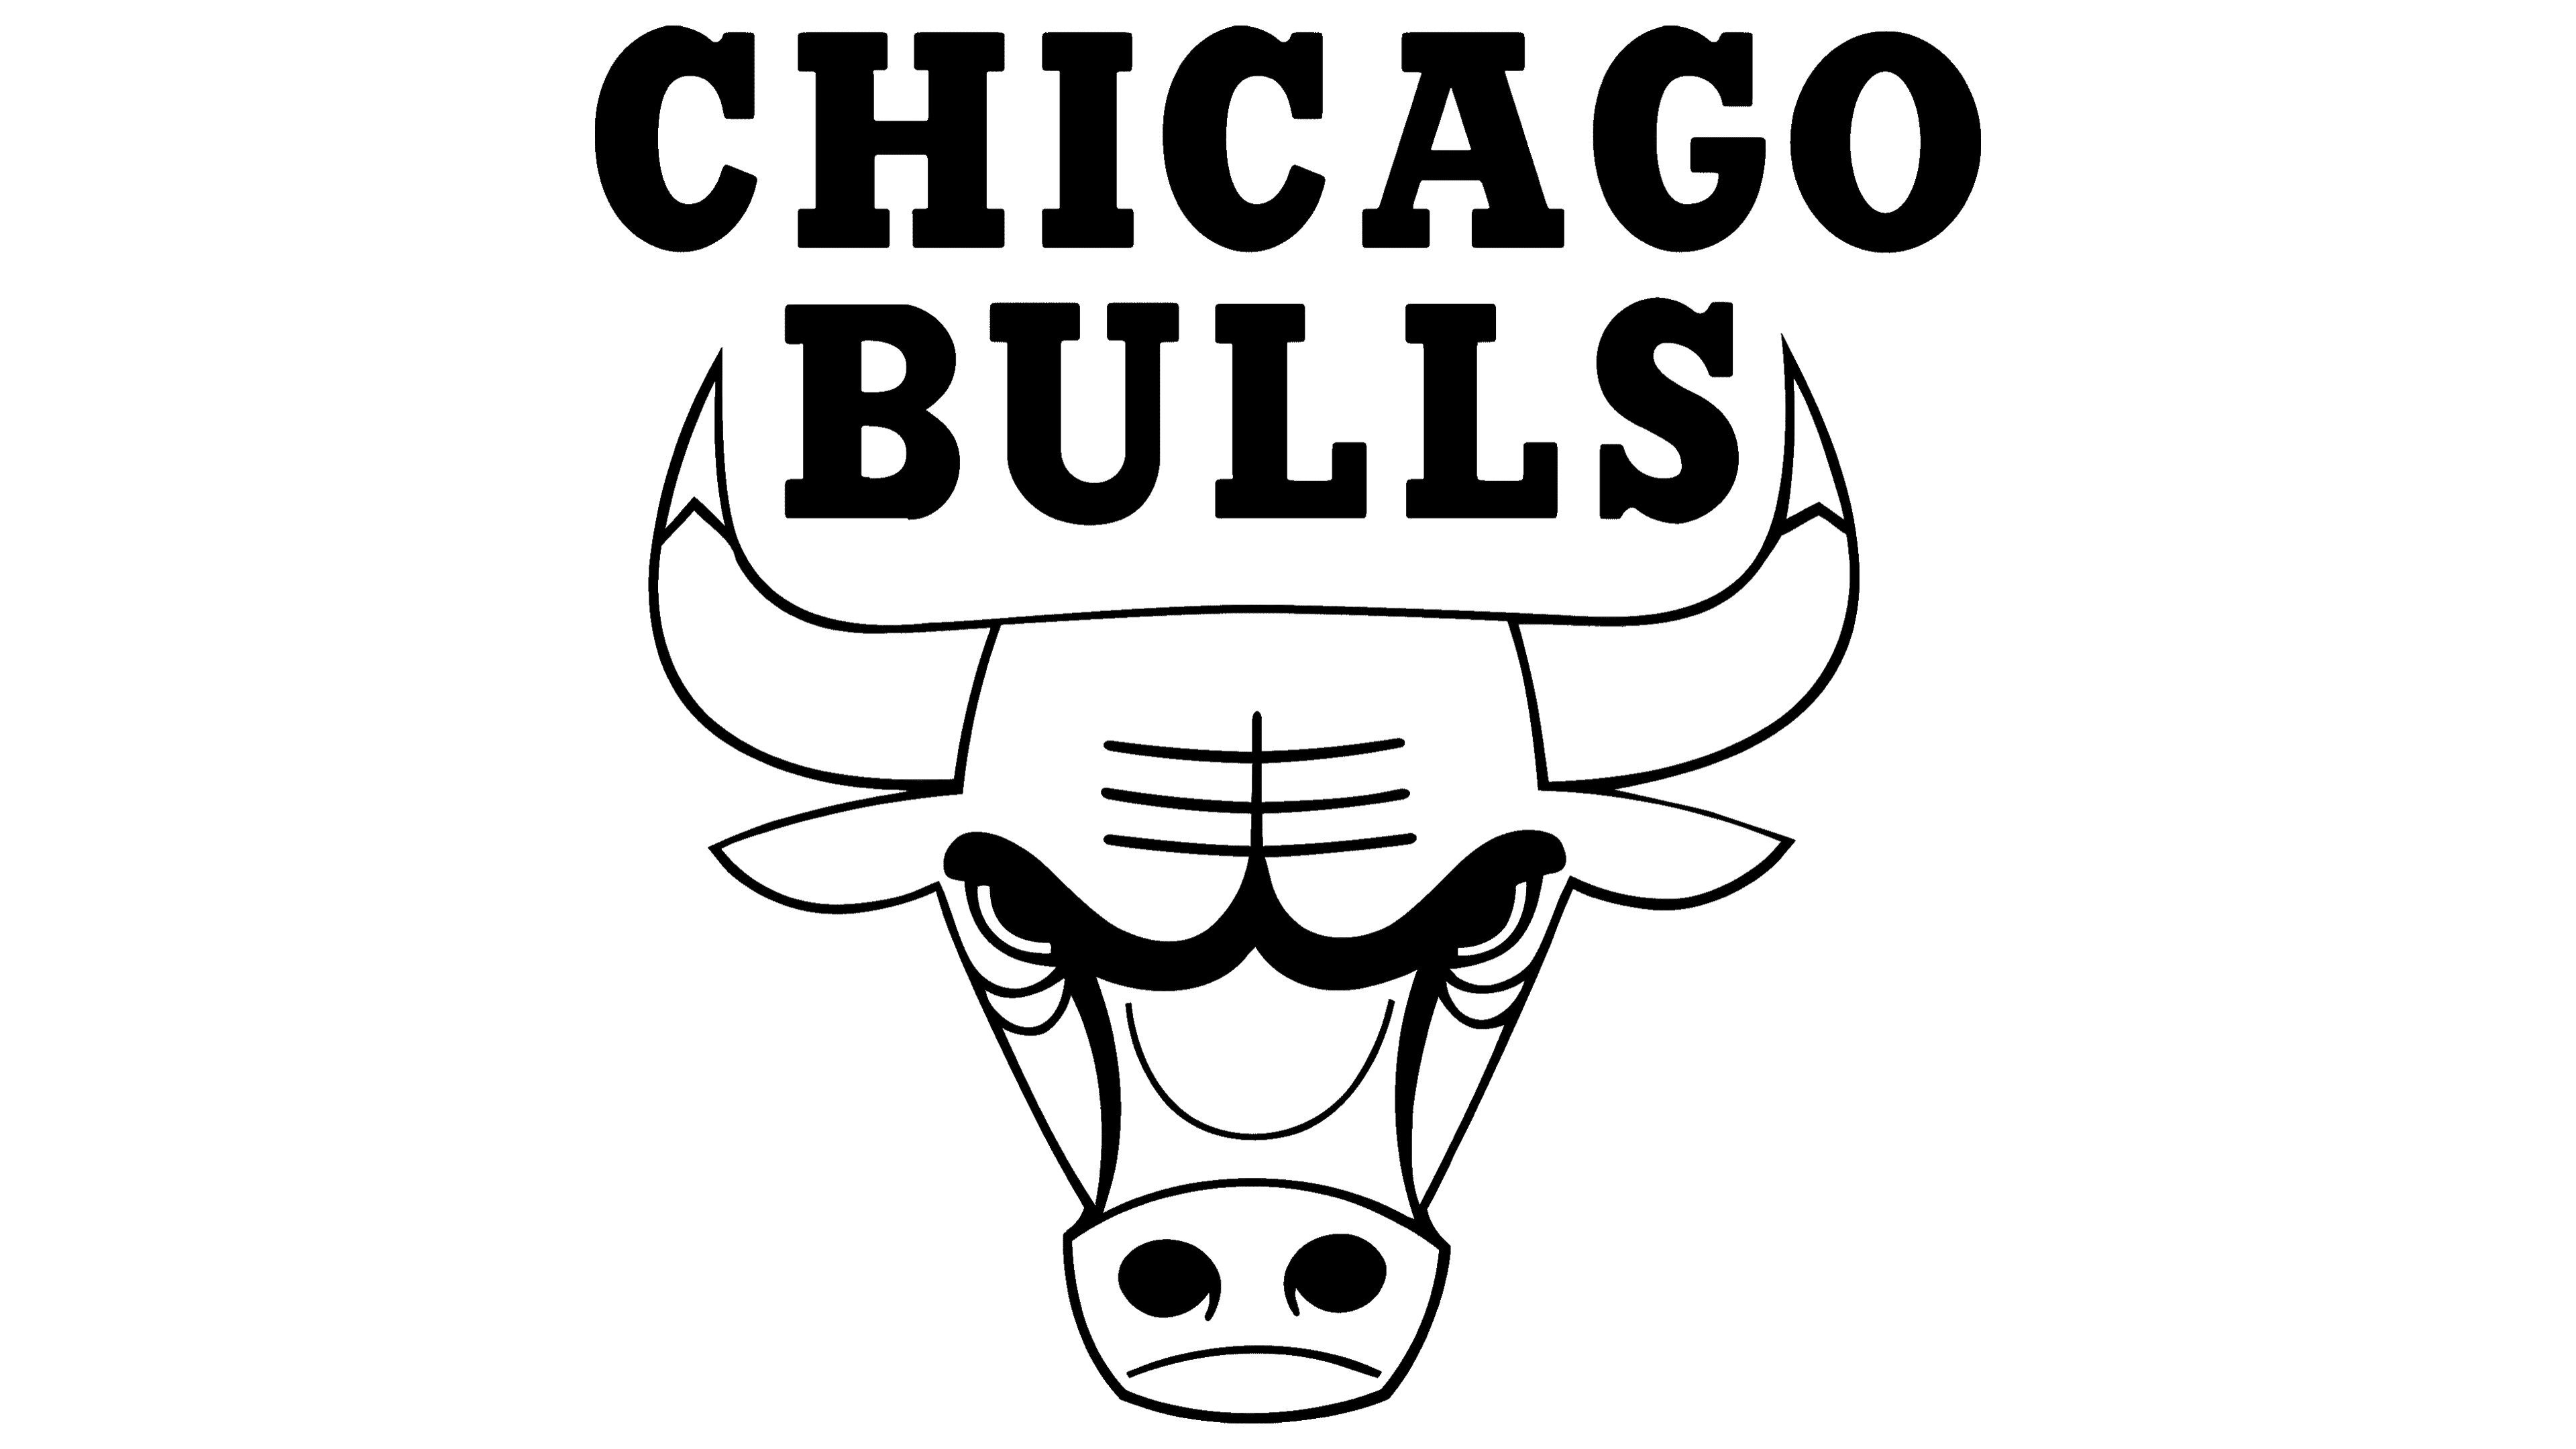 Chicago Bulls Logo Design – History, Meaning and Evolution